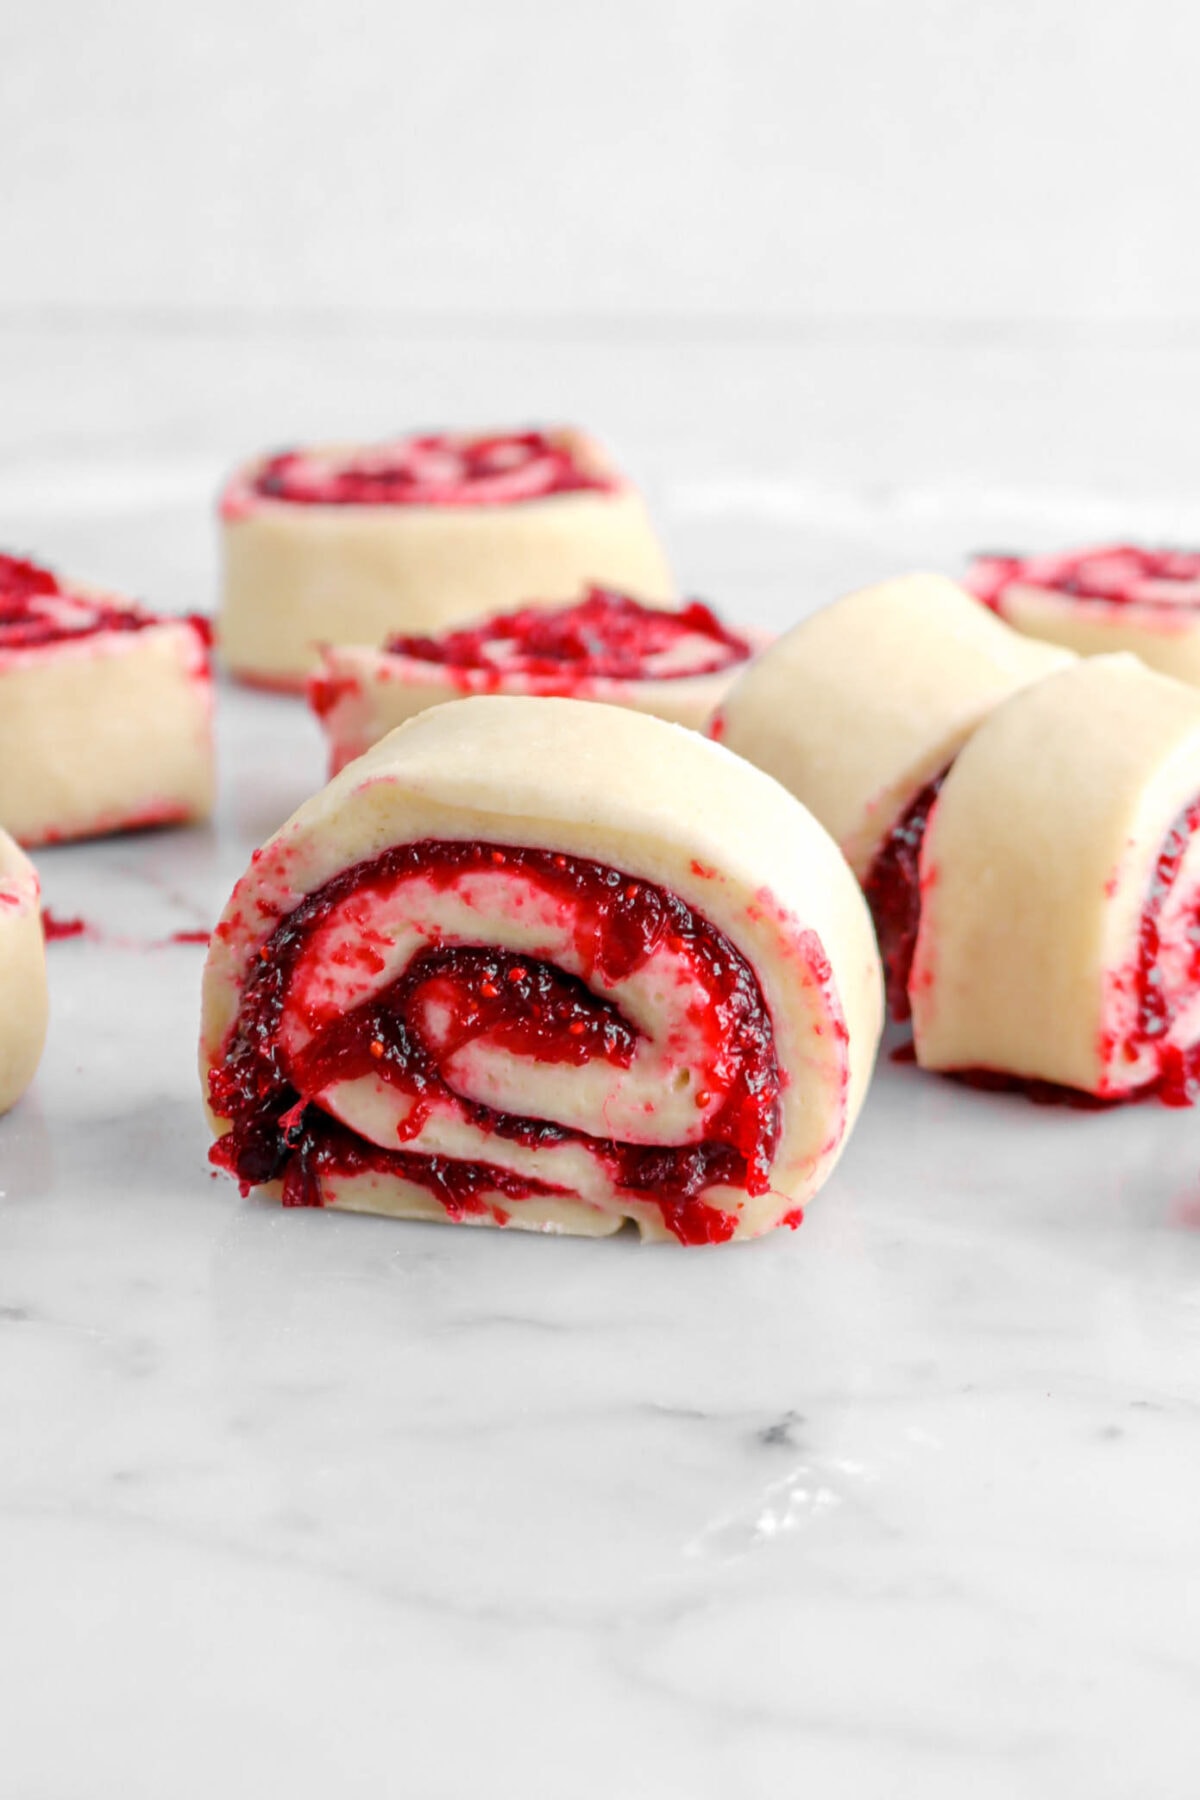 cut sweet rolls filled with cranberry am on marble surface.